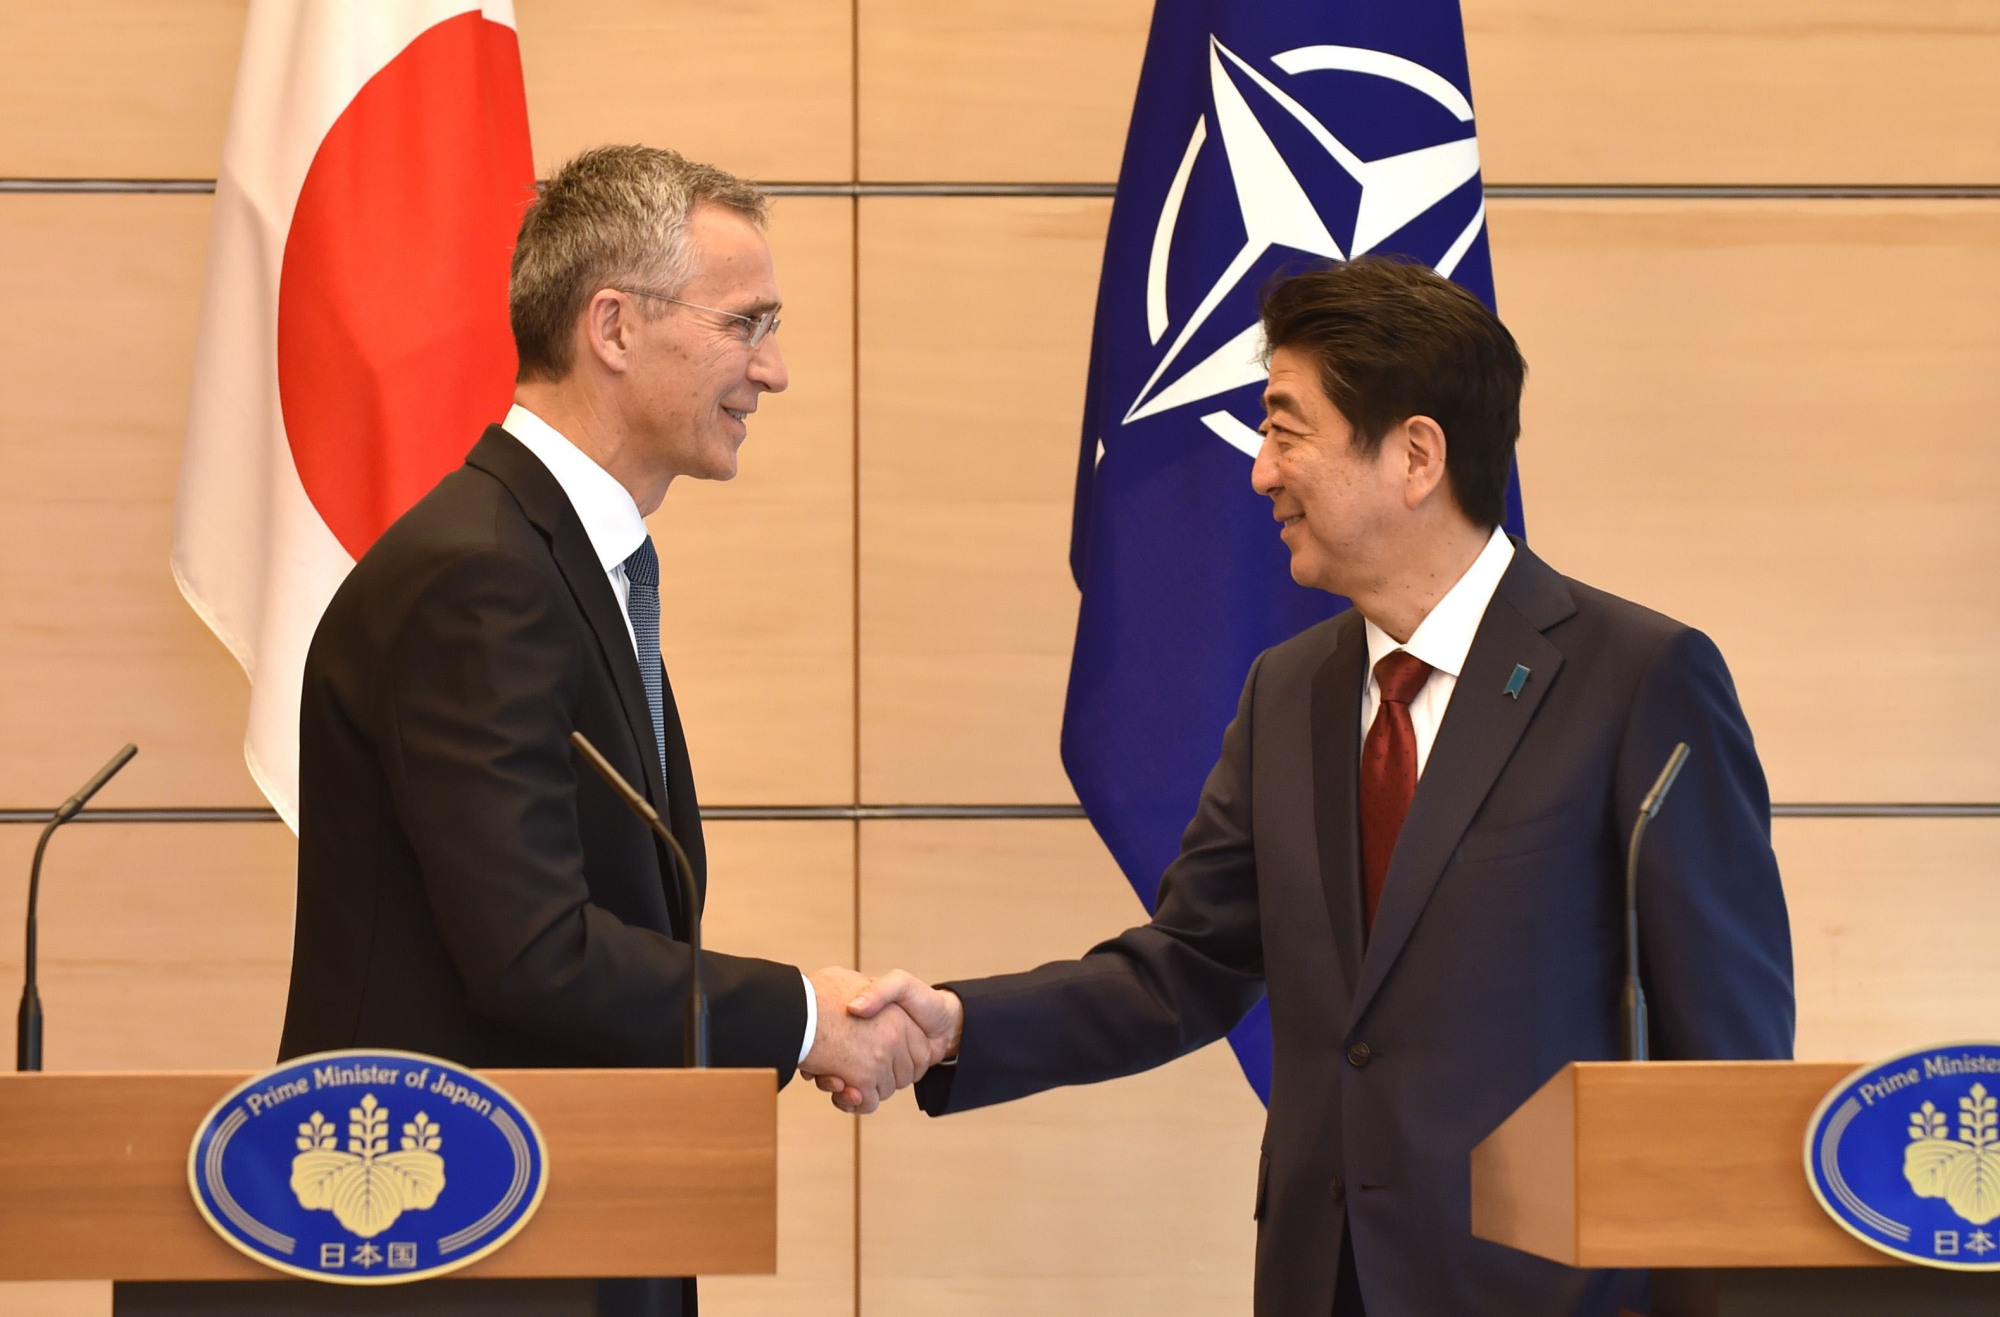 NATO in Asia-Pacific: Temporary Deterrence or Forward Thinking?